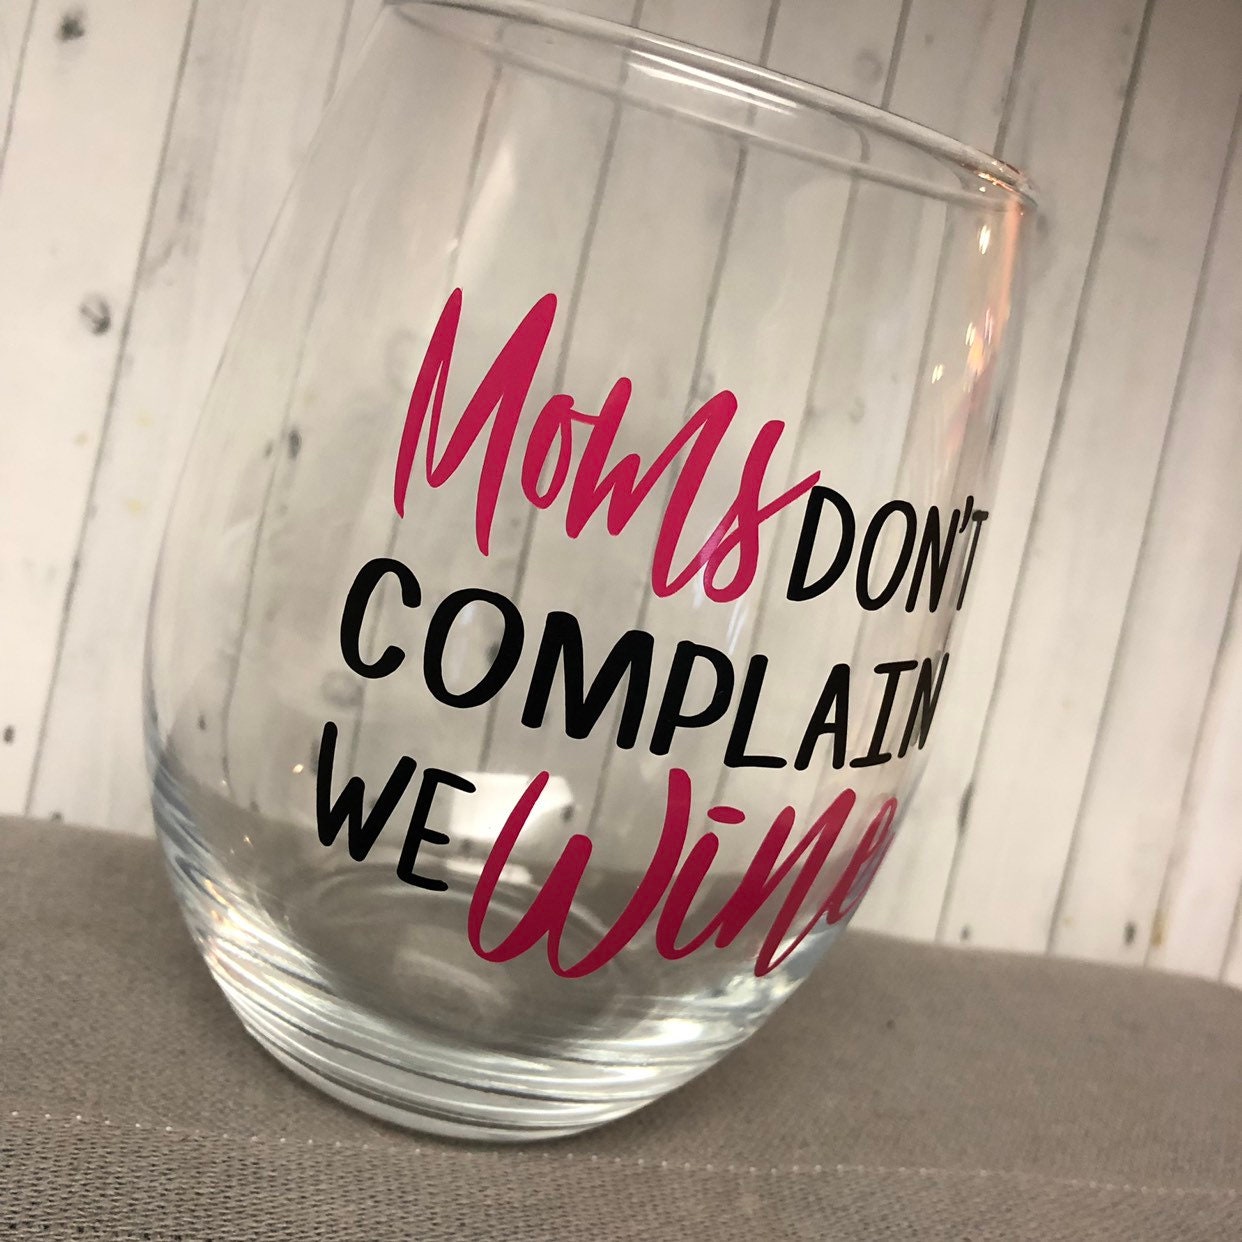 Moms dont complain we wine, Mothers Day gift, Mothers day wine glass, gift for mom, step mom gift, funny mothers day gift, personalized mom